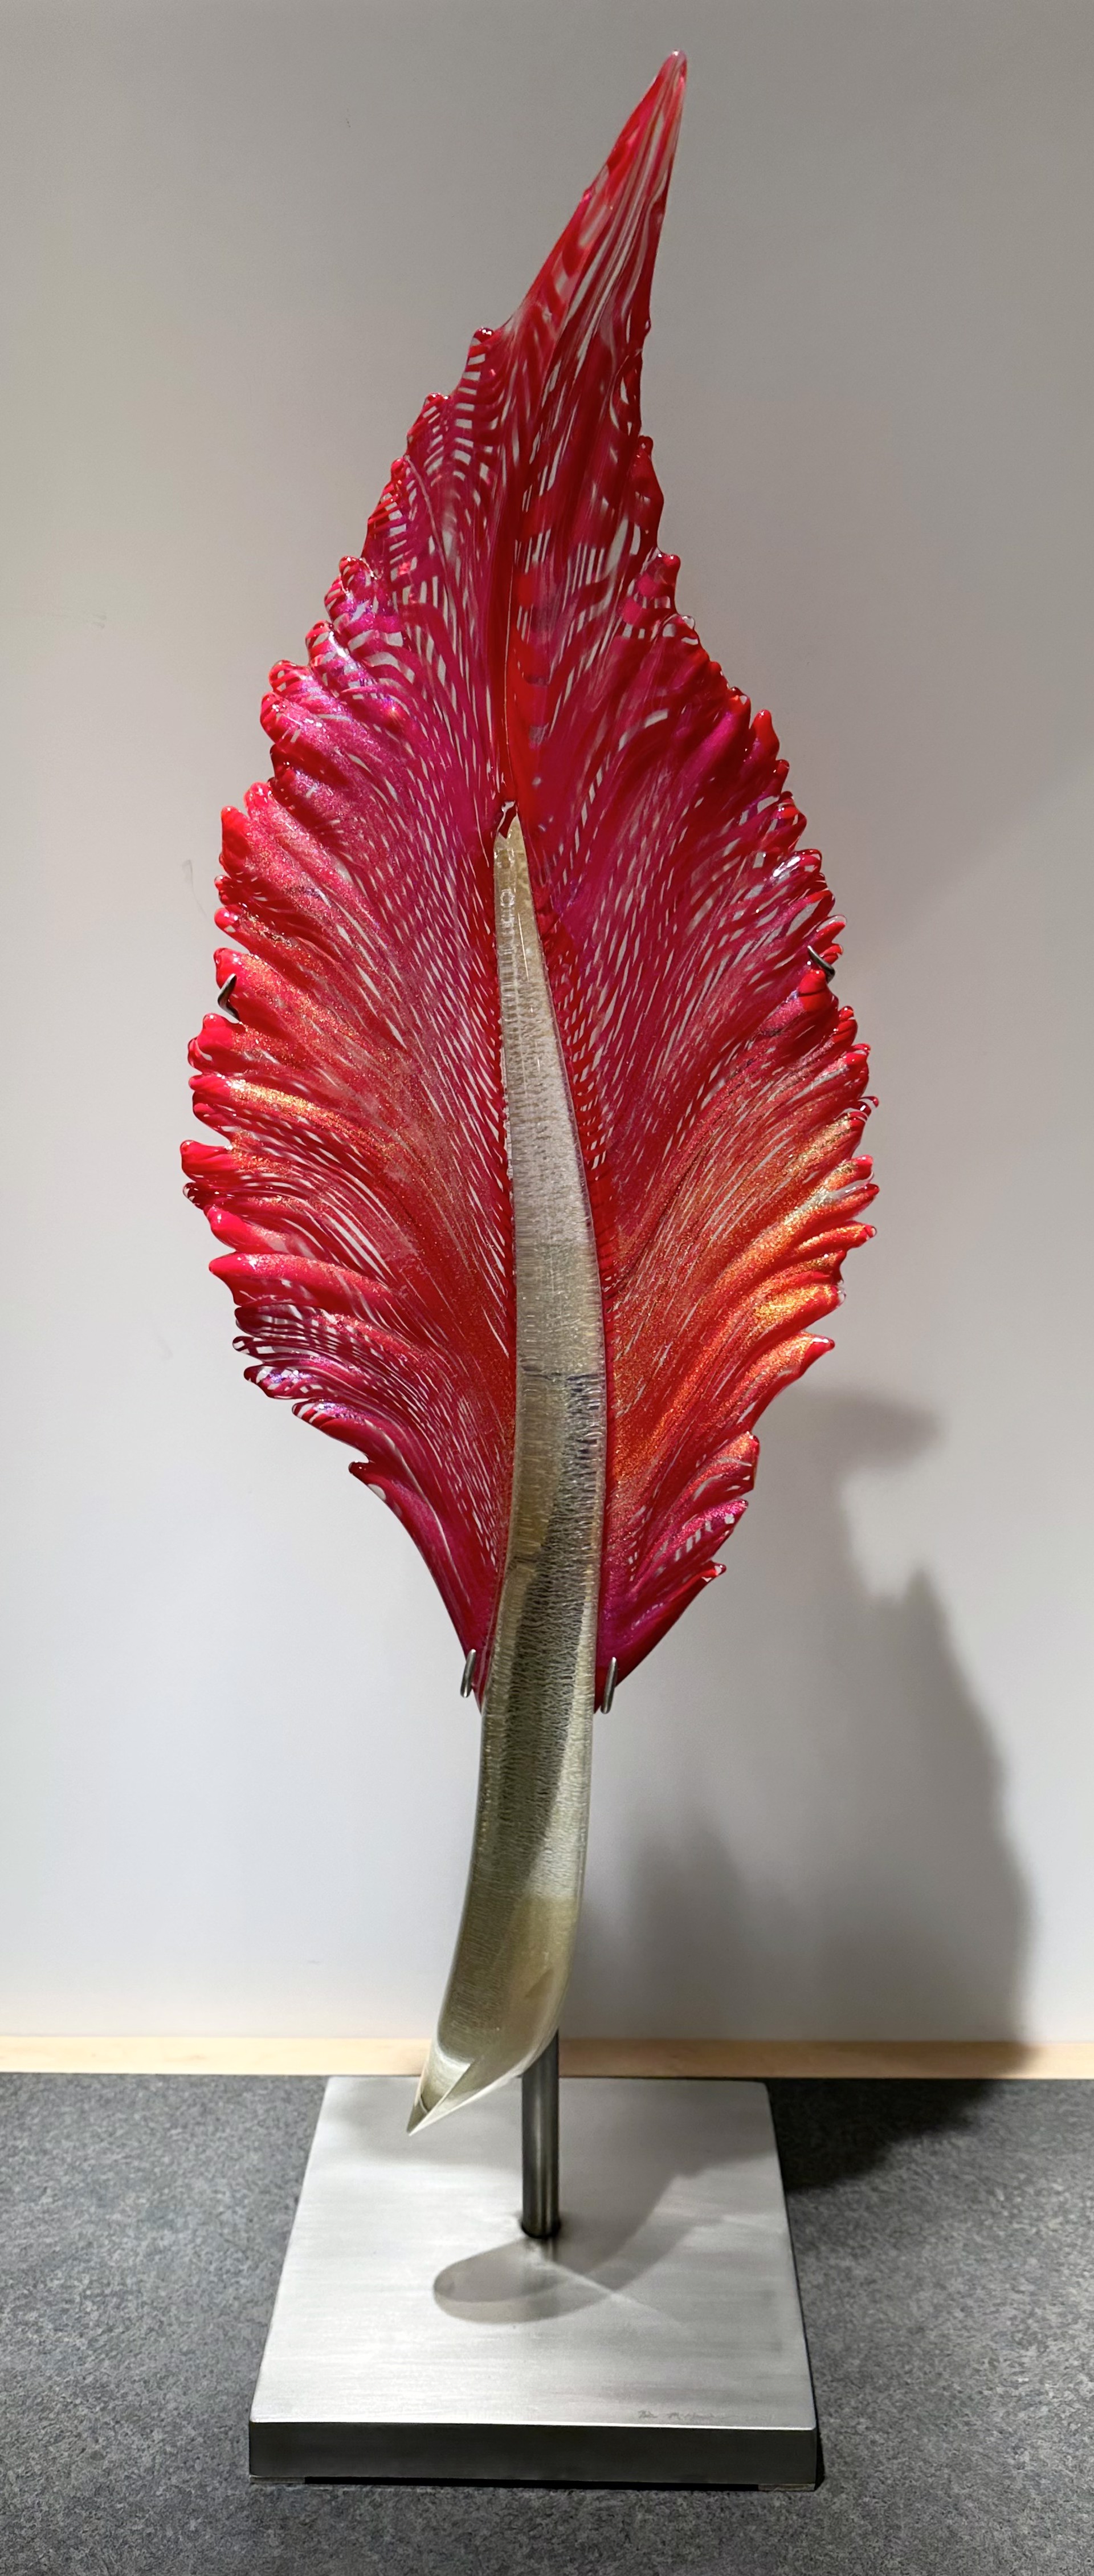 Vertical Red Feather by Nic McGuire